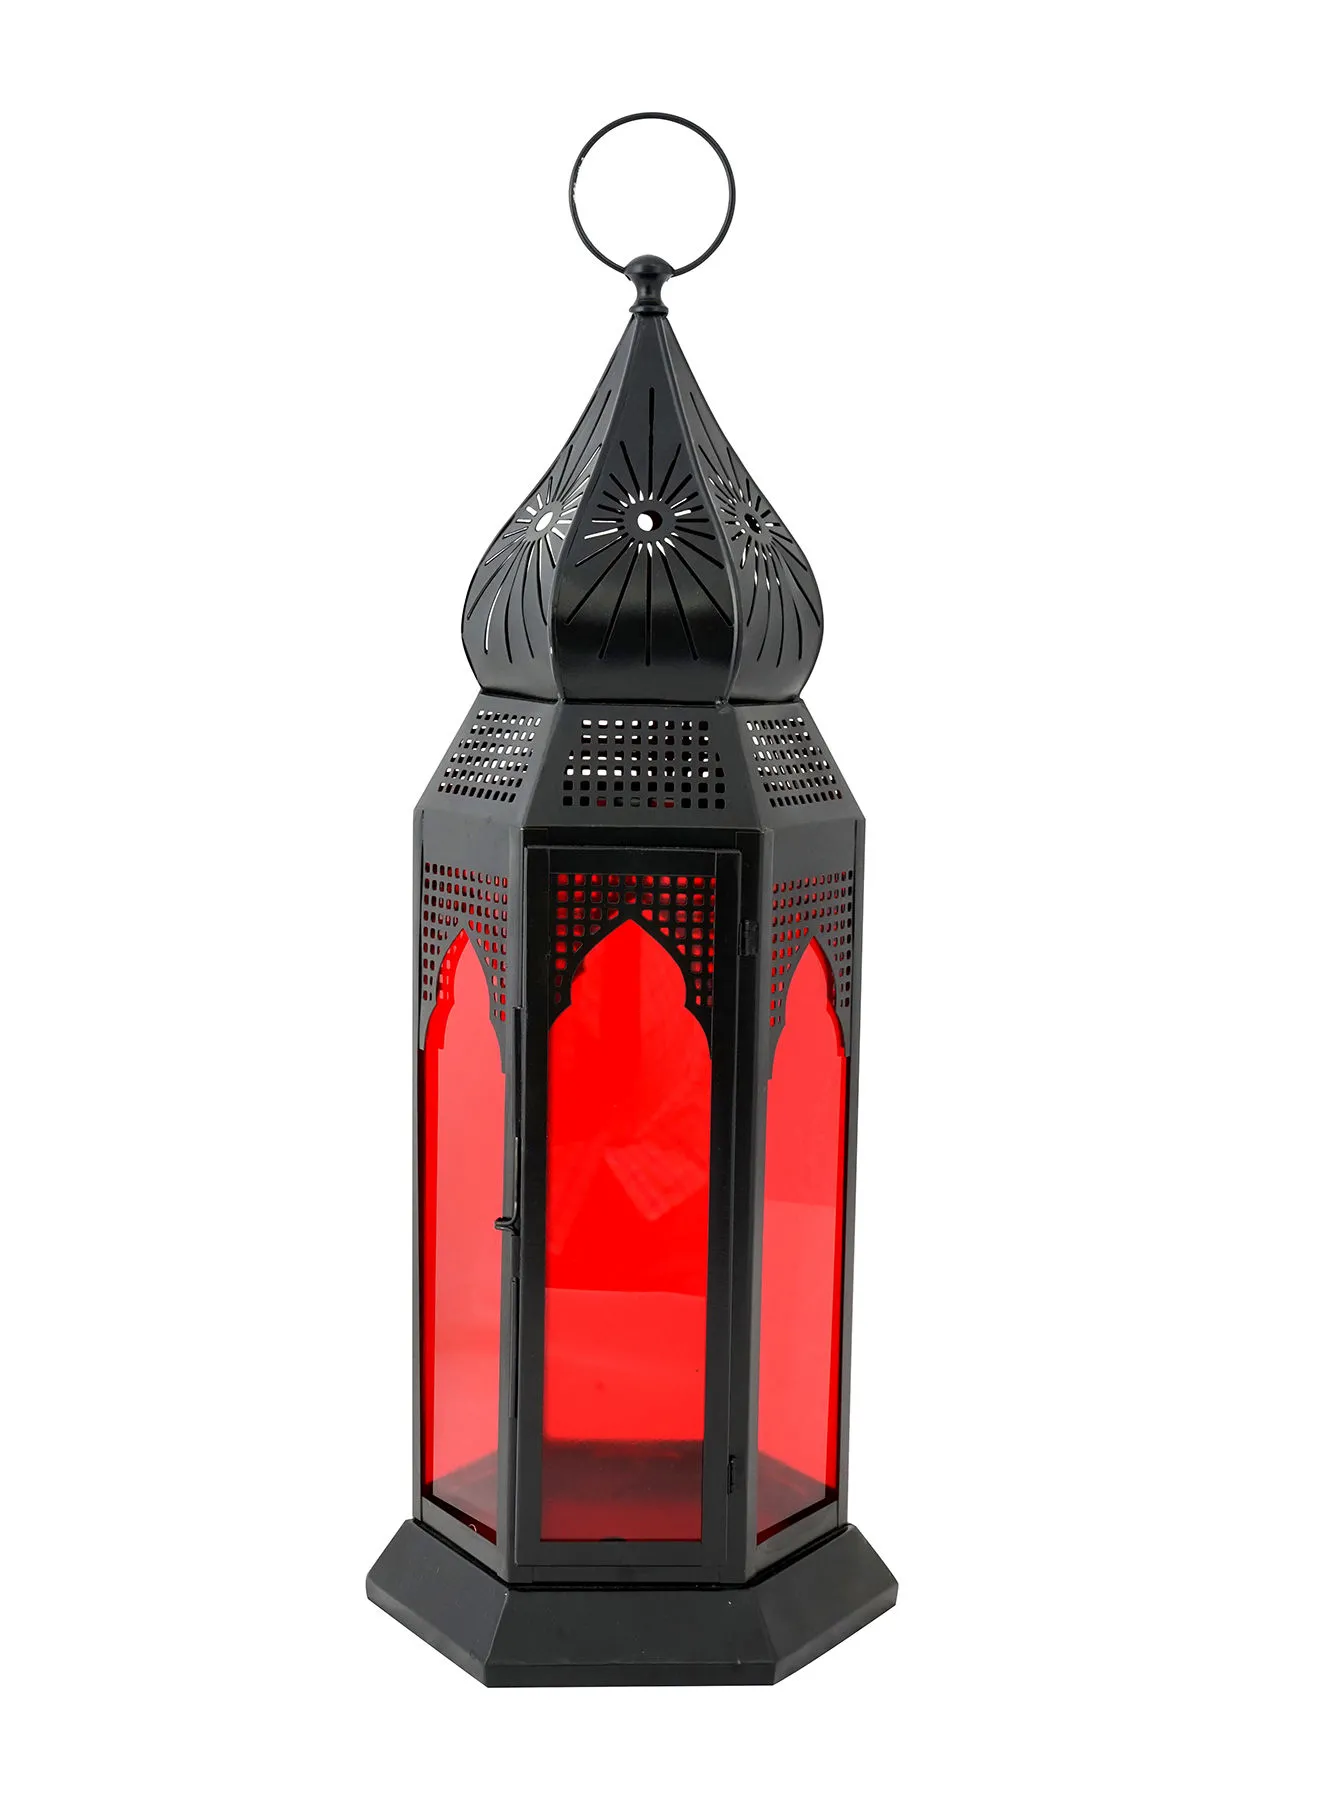 ebb & flow Modern Ramadan Candle Lantern With Glass Unique Luxury Quality Scents For The Perfect Stylish Home Black 23 x 23 x 54centimeter